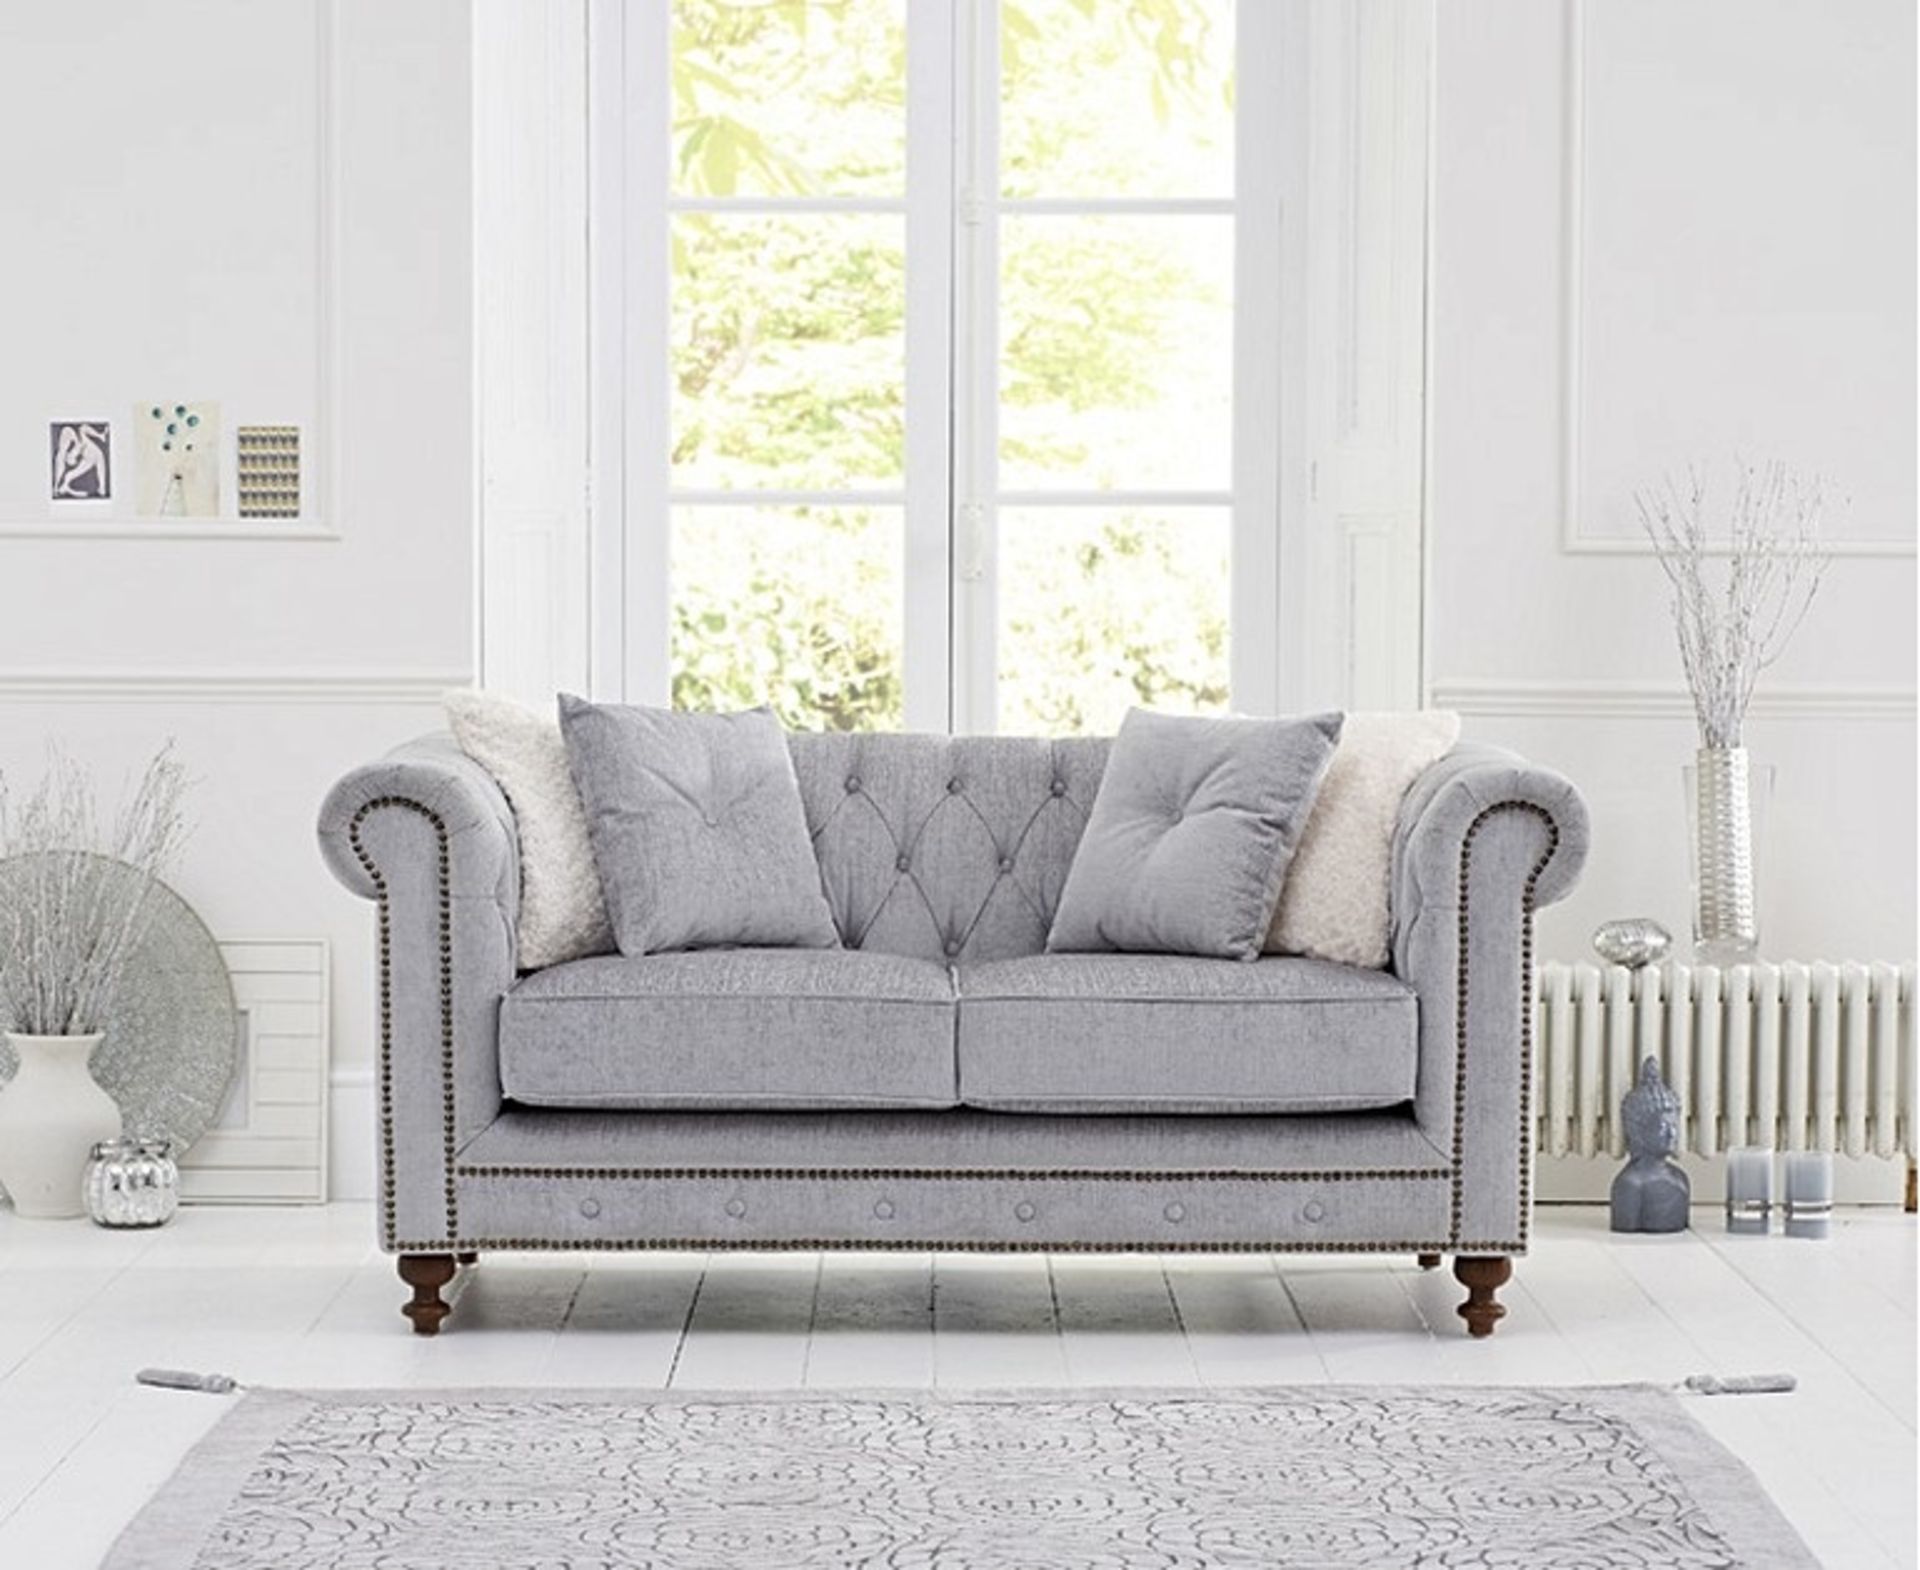 Milano Chesterfield Grey Plush Fabric Two Seater Sofa Exudes Modern Luxury With Raditional Buttoning